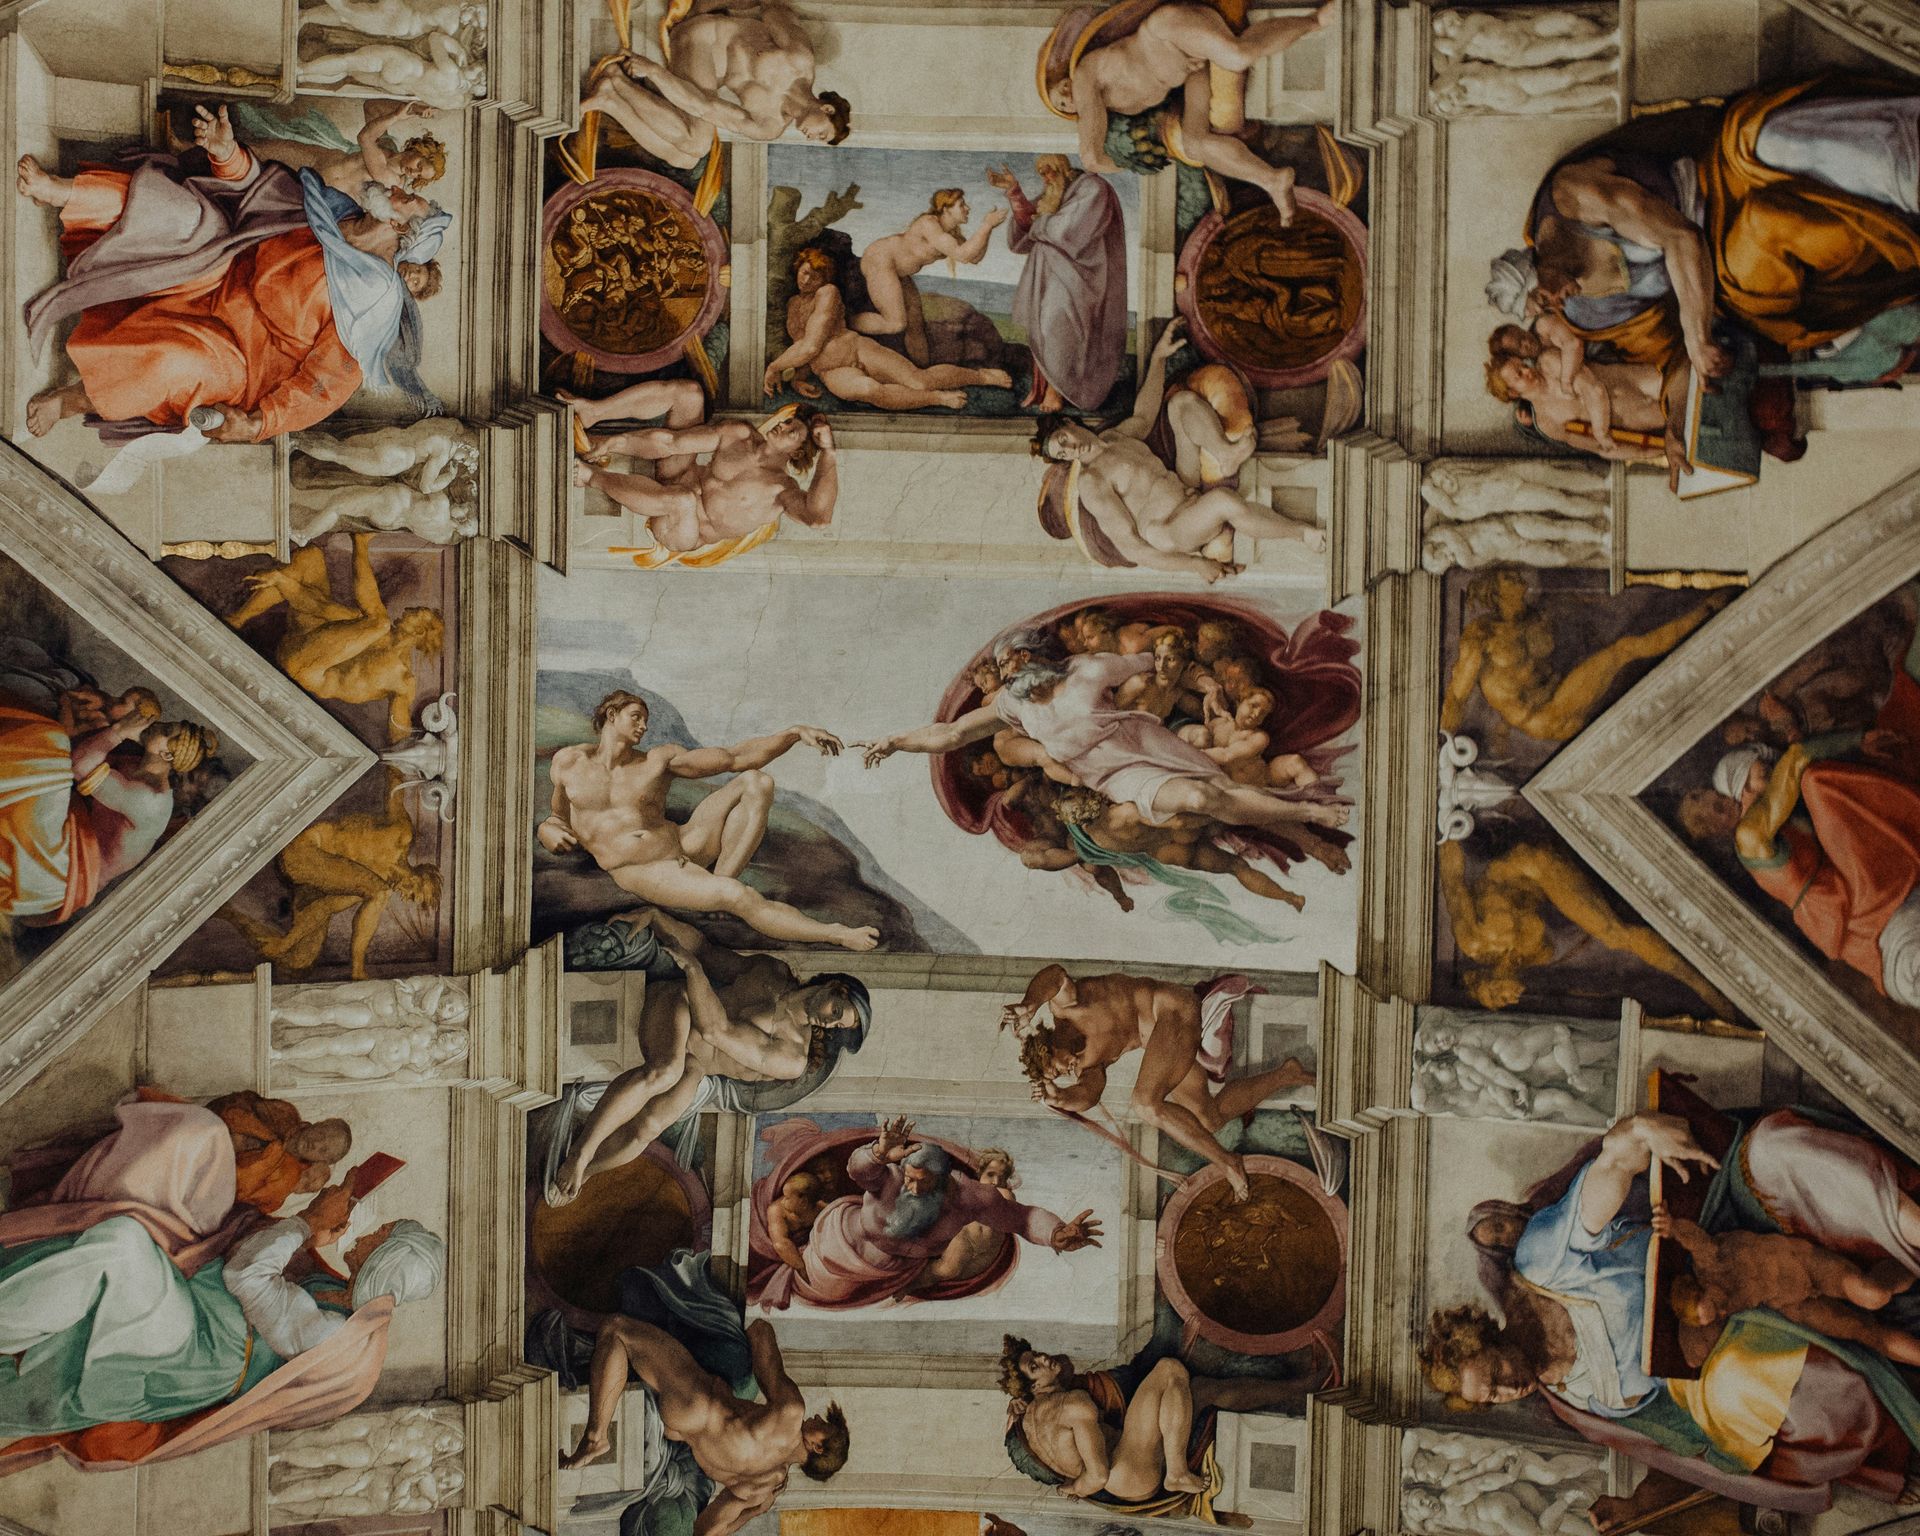 How to visit the Sistine Chapel